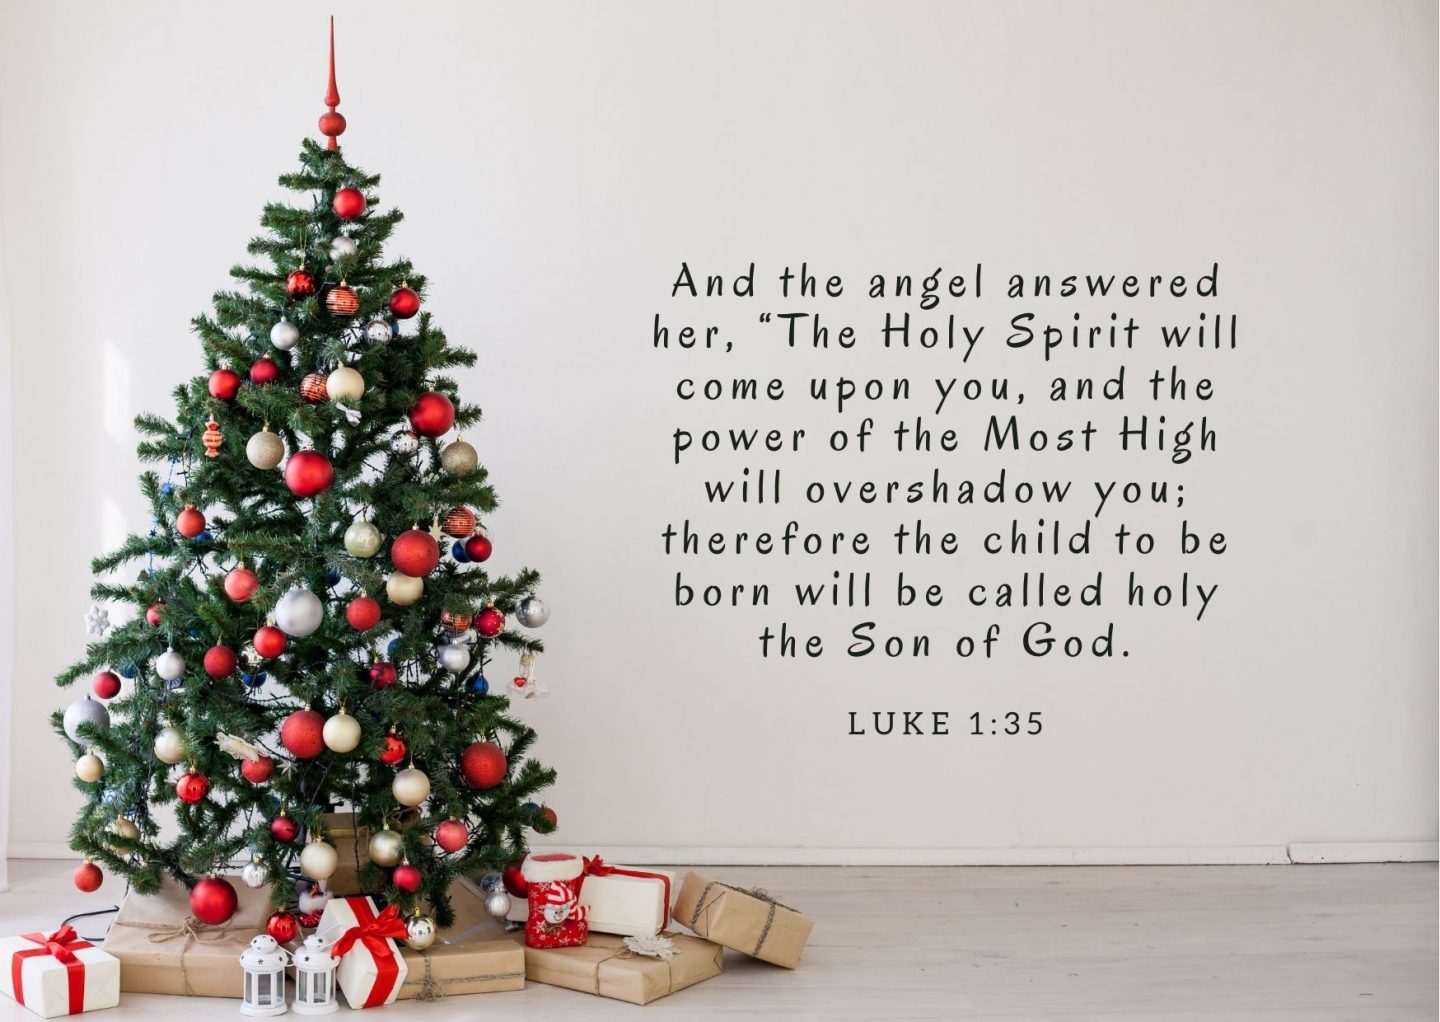 And the angel answered her, “The Holy Spirit will come upon you, and the power of the Most High will overshadow you; therefore the child to be born will be called holy the Son of God. Luke 1:35